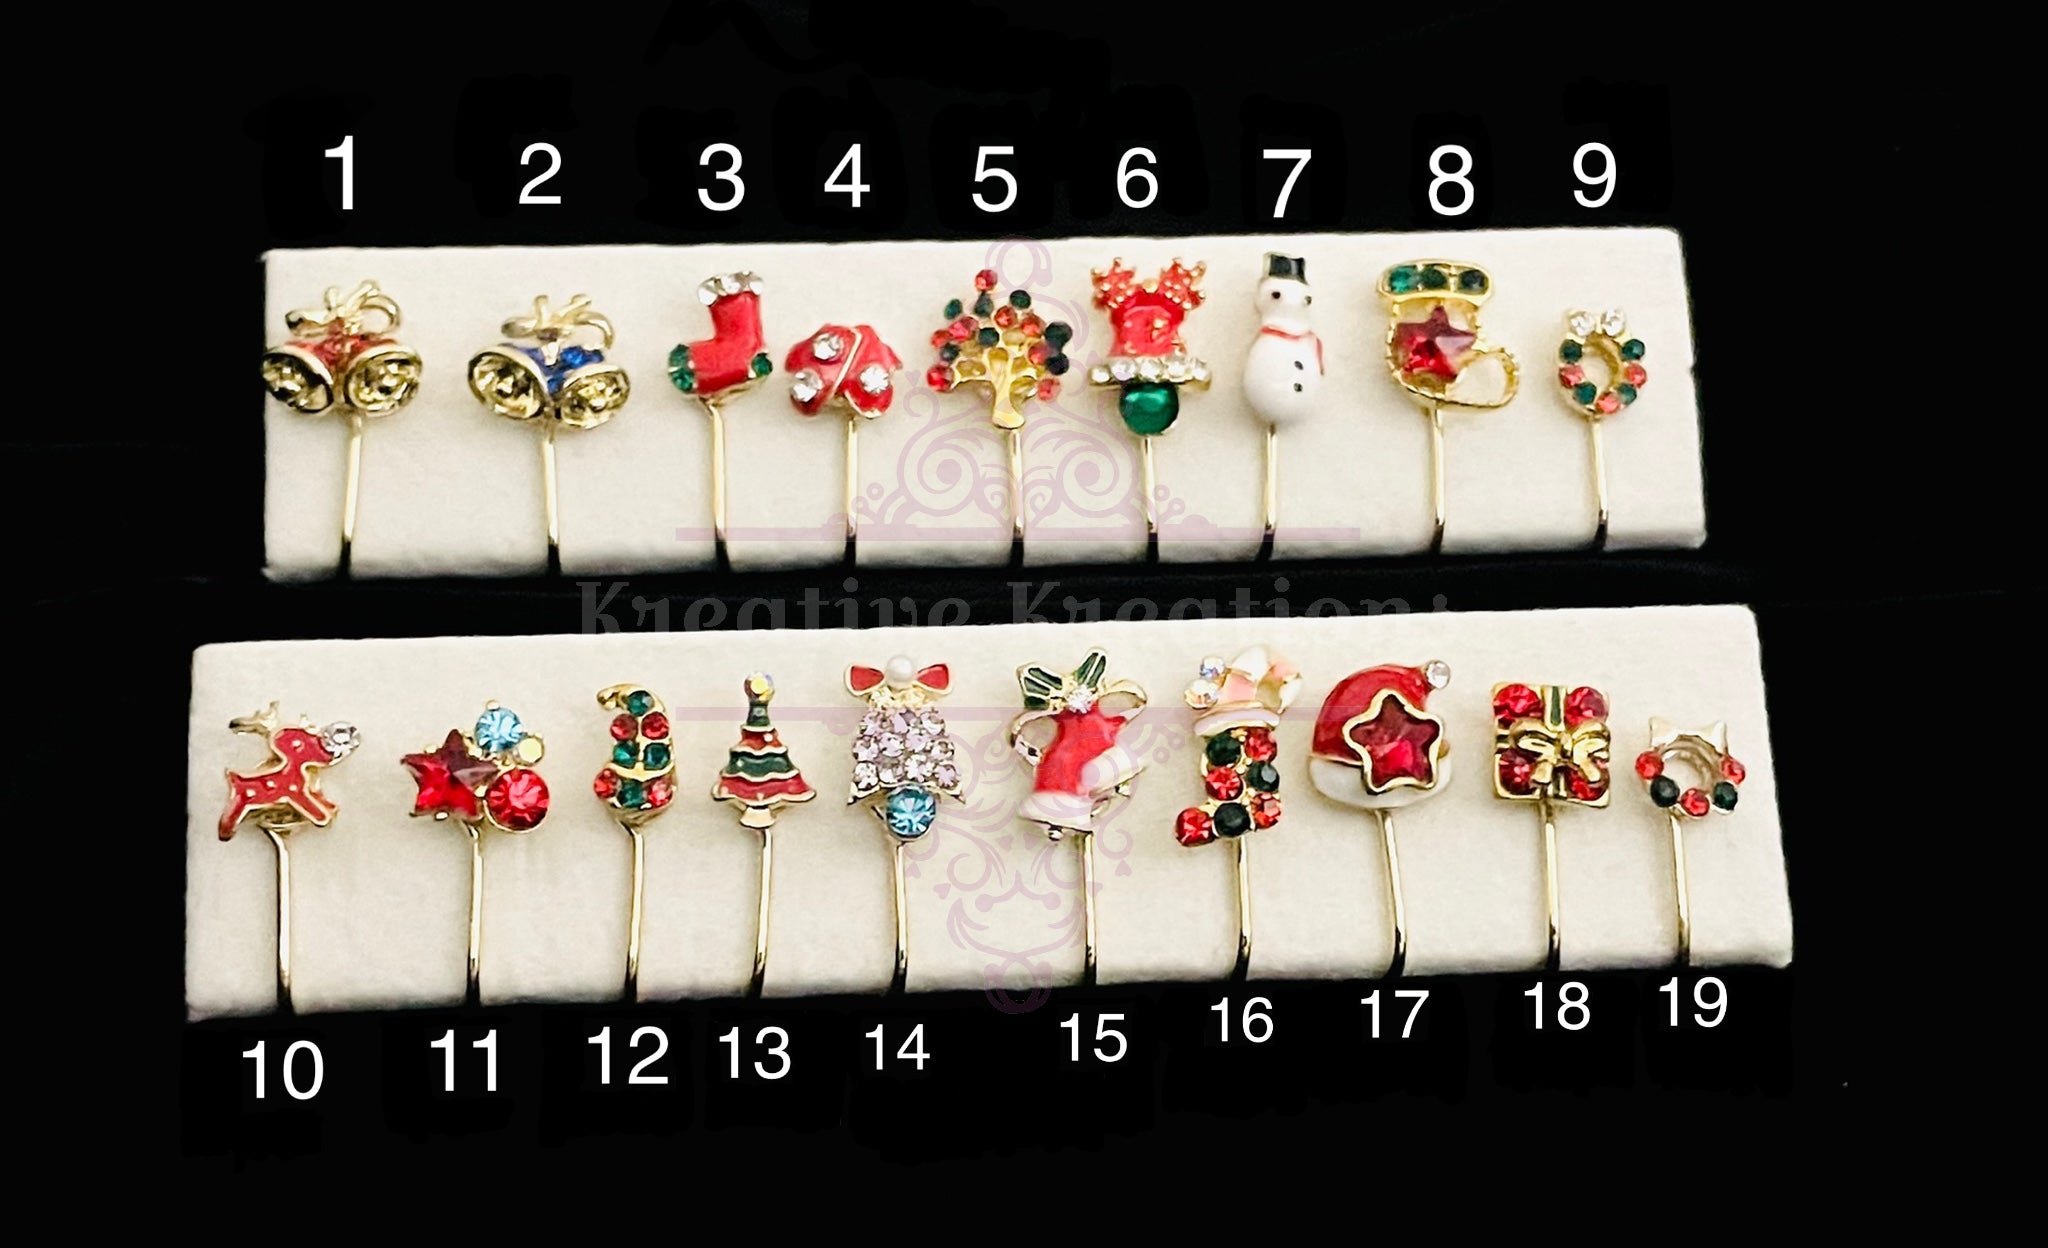 Holiday Theme Nose Cuffs - Fake Piercings